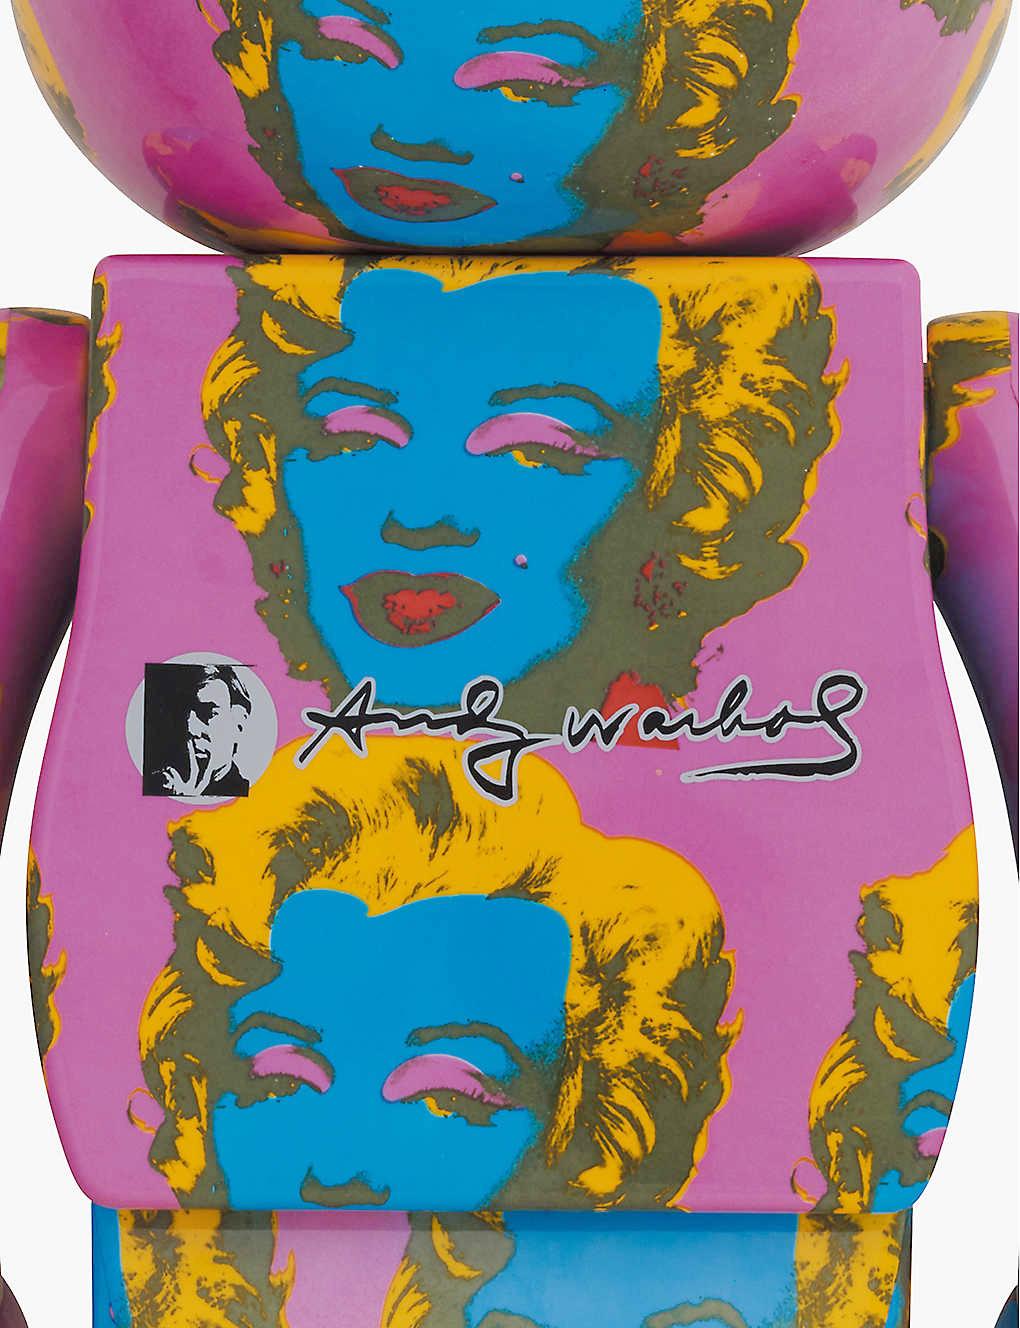 Bearbrick x Andy Warhol Foundation 400% Vinyl Figures: Set of two individual works (2020-2021):
Andy Warhol (after) Flowers & Marilyn collectible trademarked & licensed by the Estate of Andy Warhol. The partnered collectible reveals Andy Warhol's